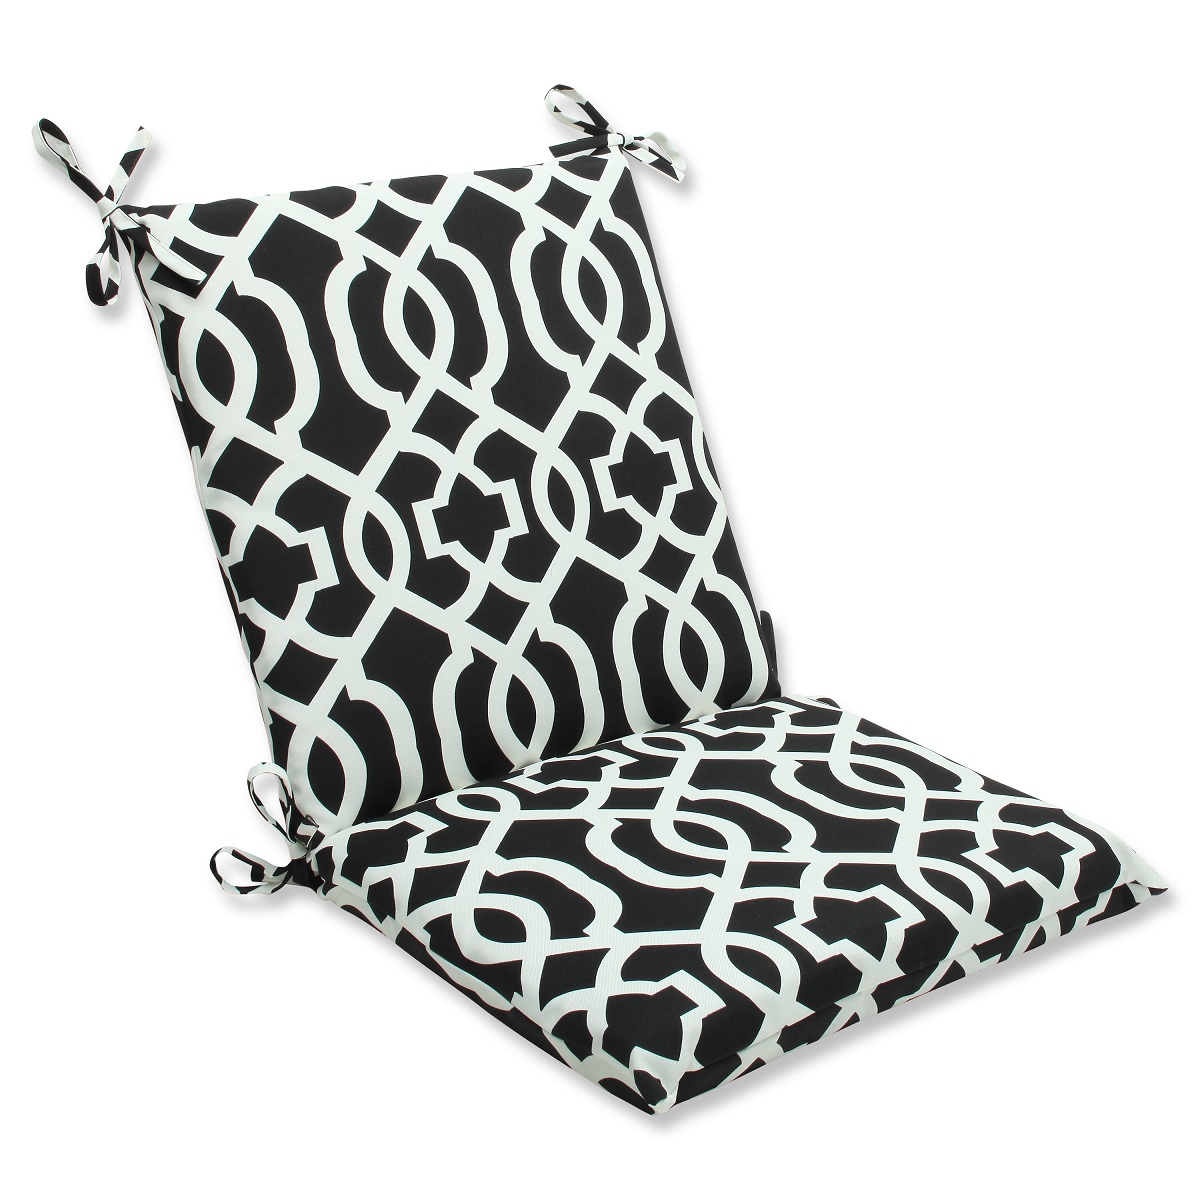 Pillow Perfect 36.5" Black and White Geometric Outdoor Patio Squared Chair Cushion